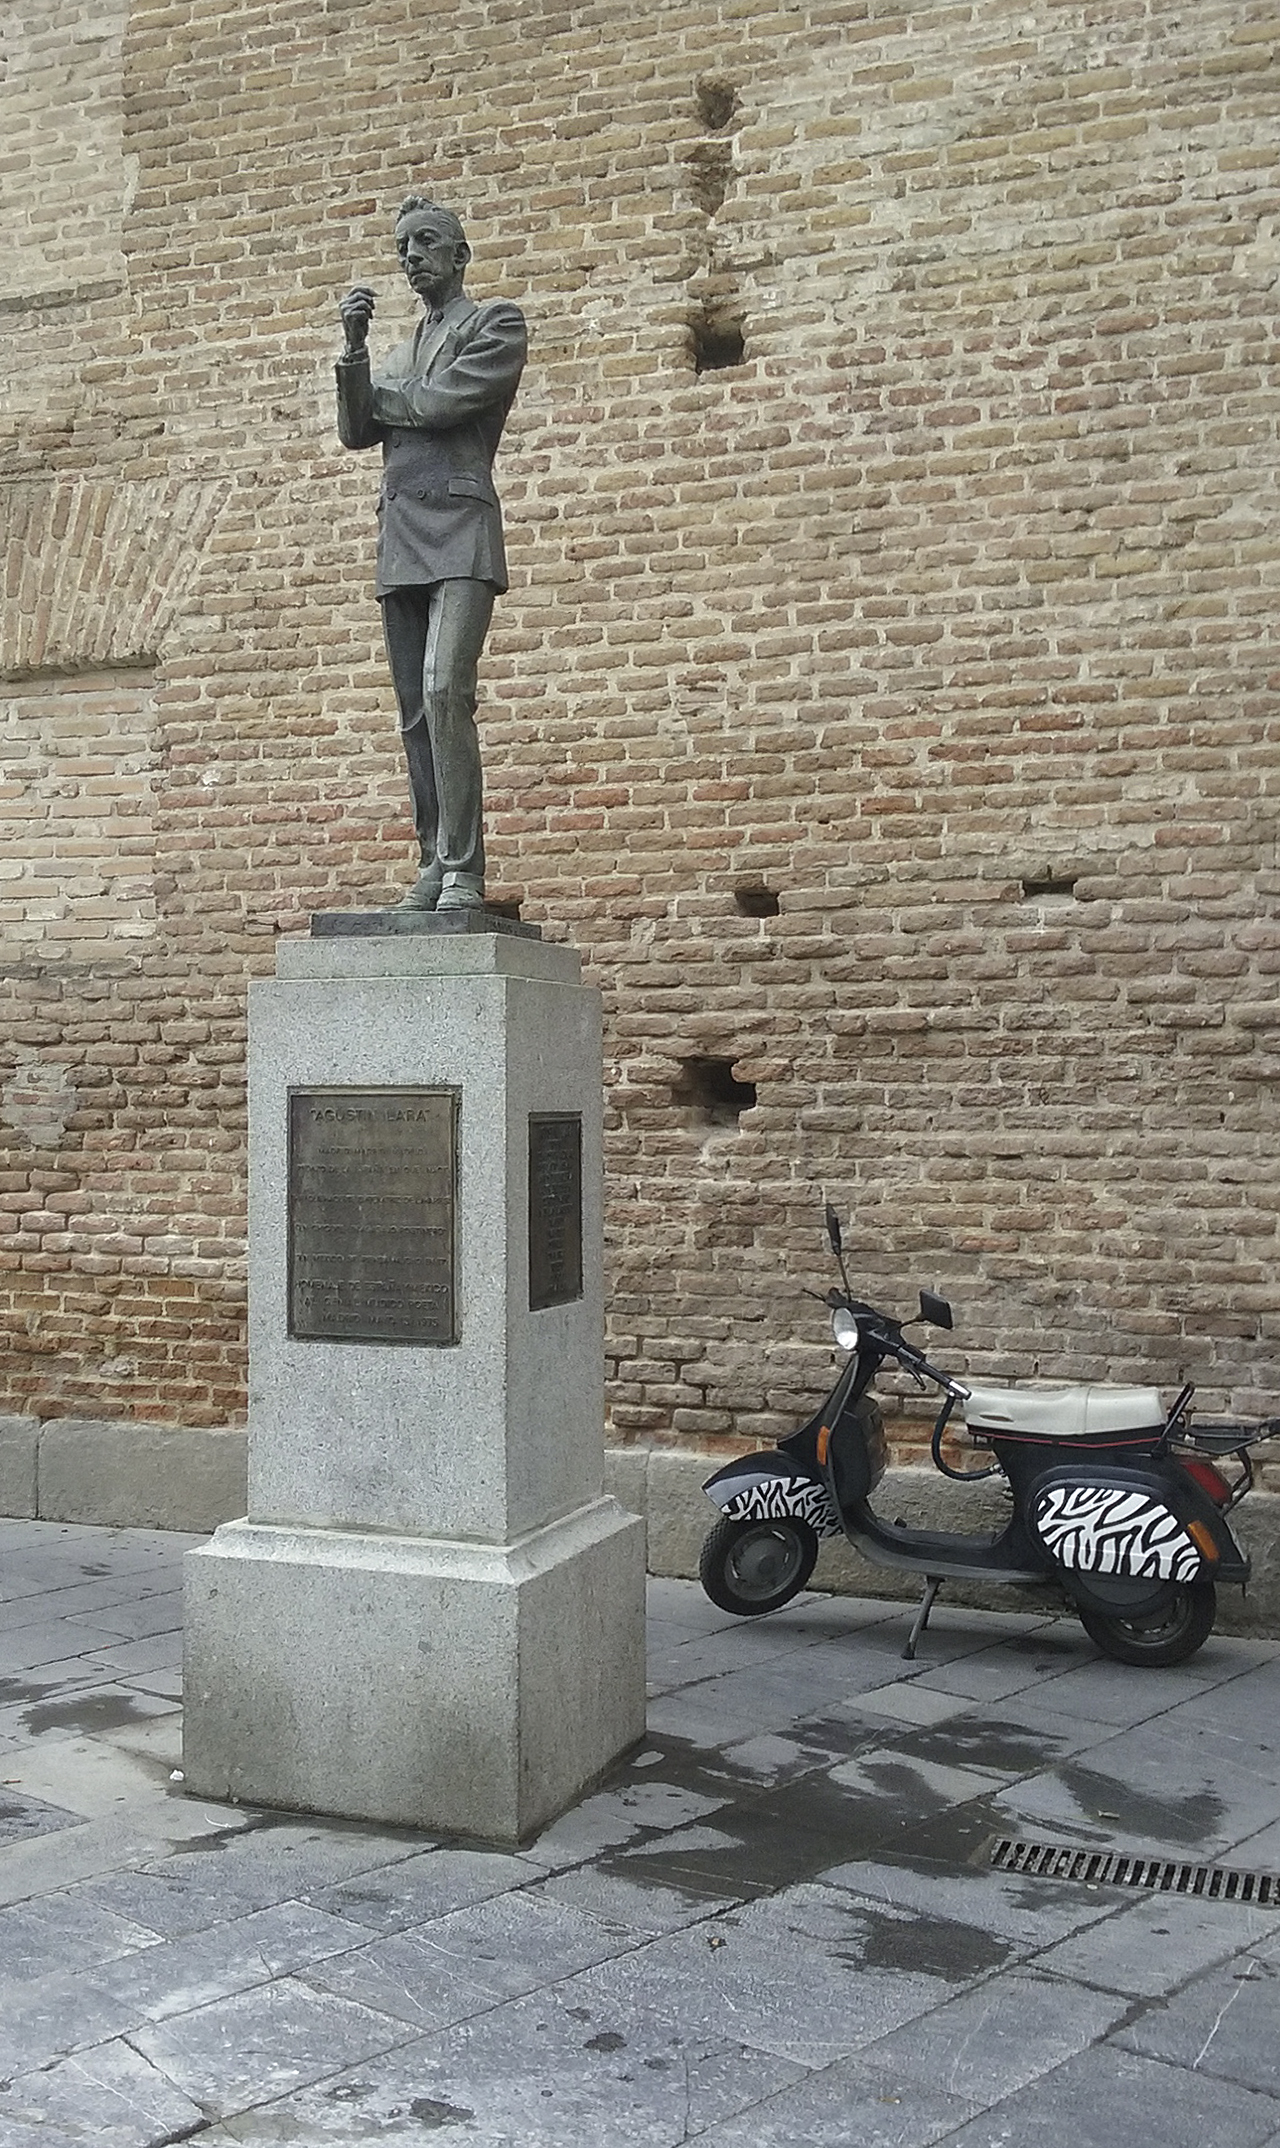  Augustine Lara contemplates Madrid as a Mod Vespa sits patiently awaiting it's owner. 